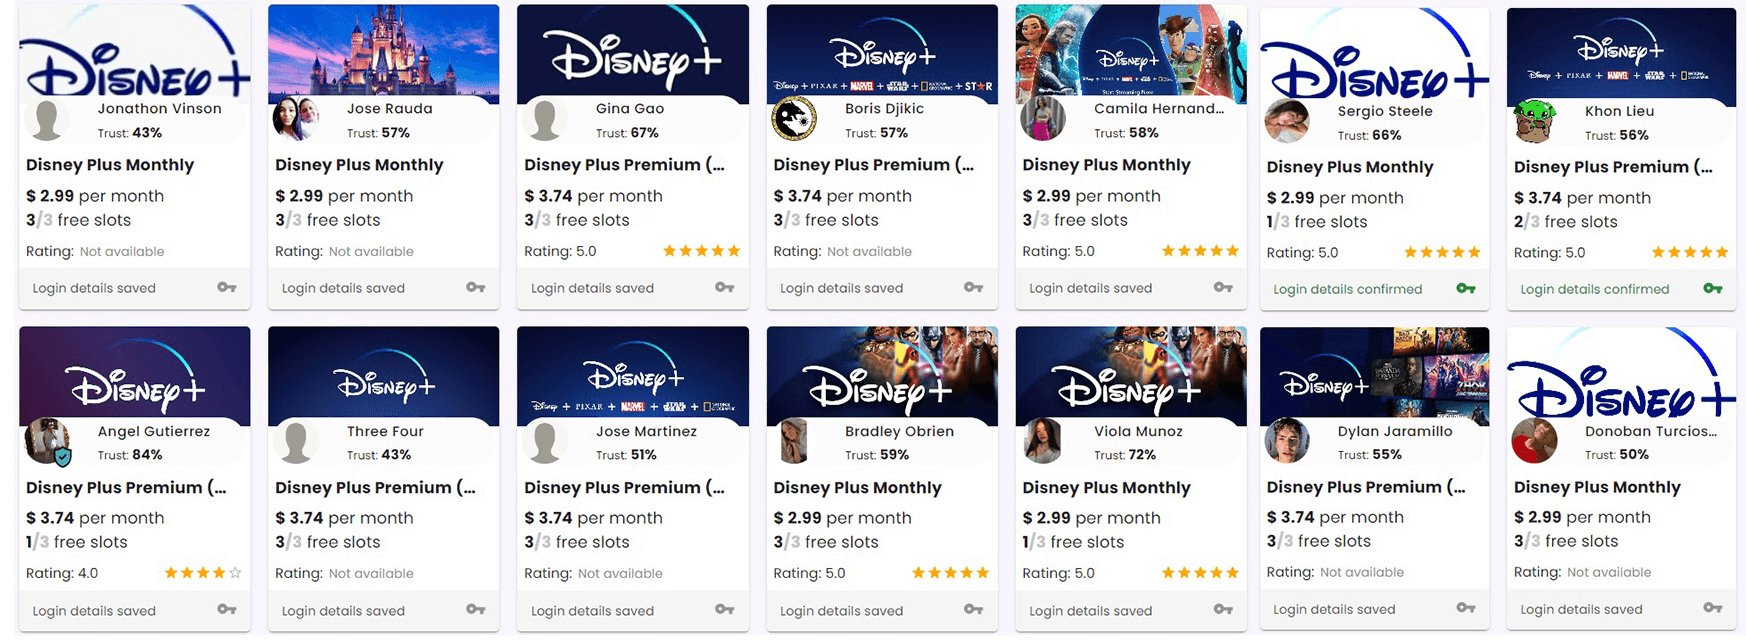 How to become an Admin and share your Disney account. A Disney Plus price increase is certainly annoying, but wit Together Price you can share your Disnay Plus subscription and save up to 75% on the costs.